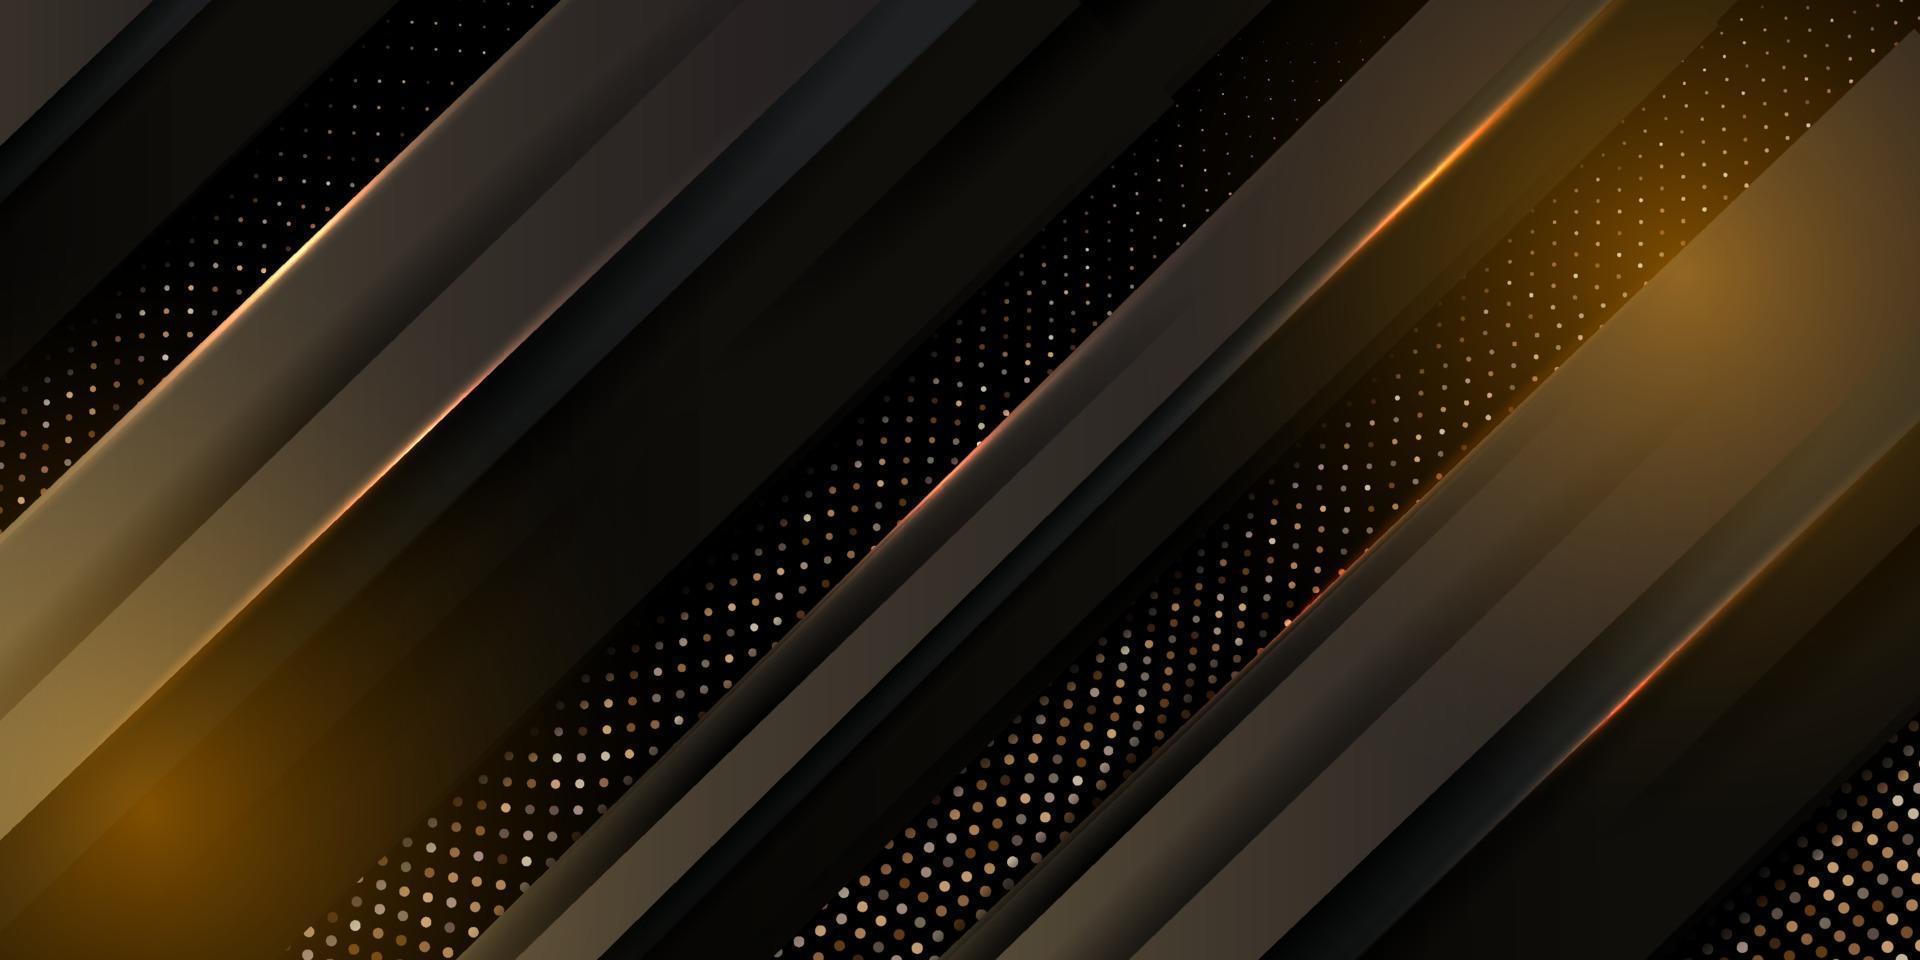 Black and golden sliced surface. Abstract geometric background vector